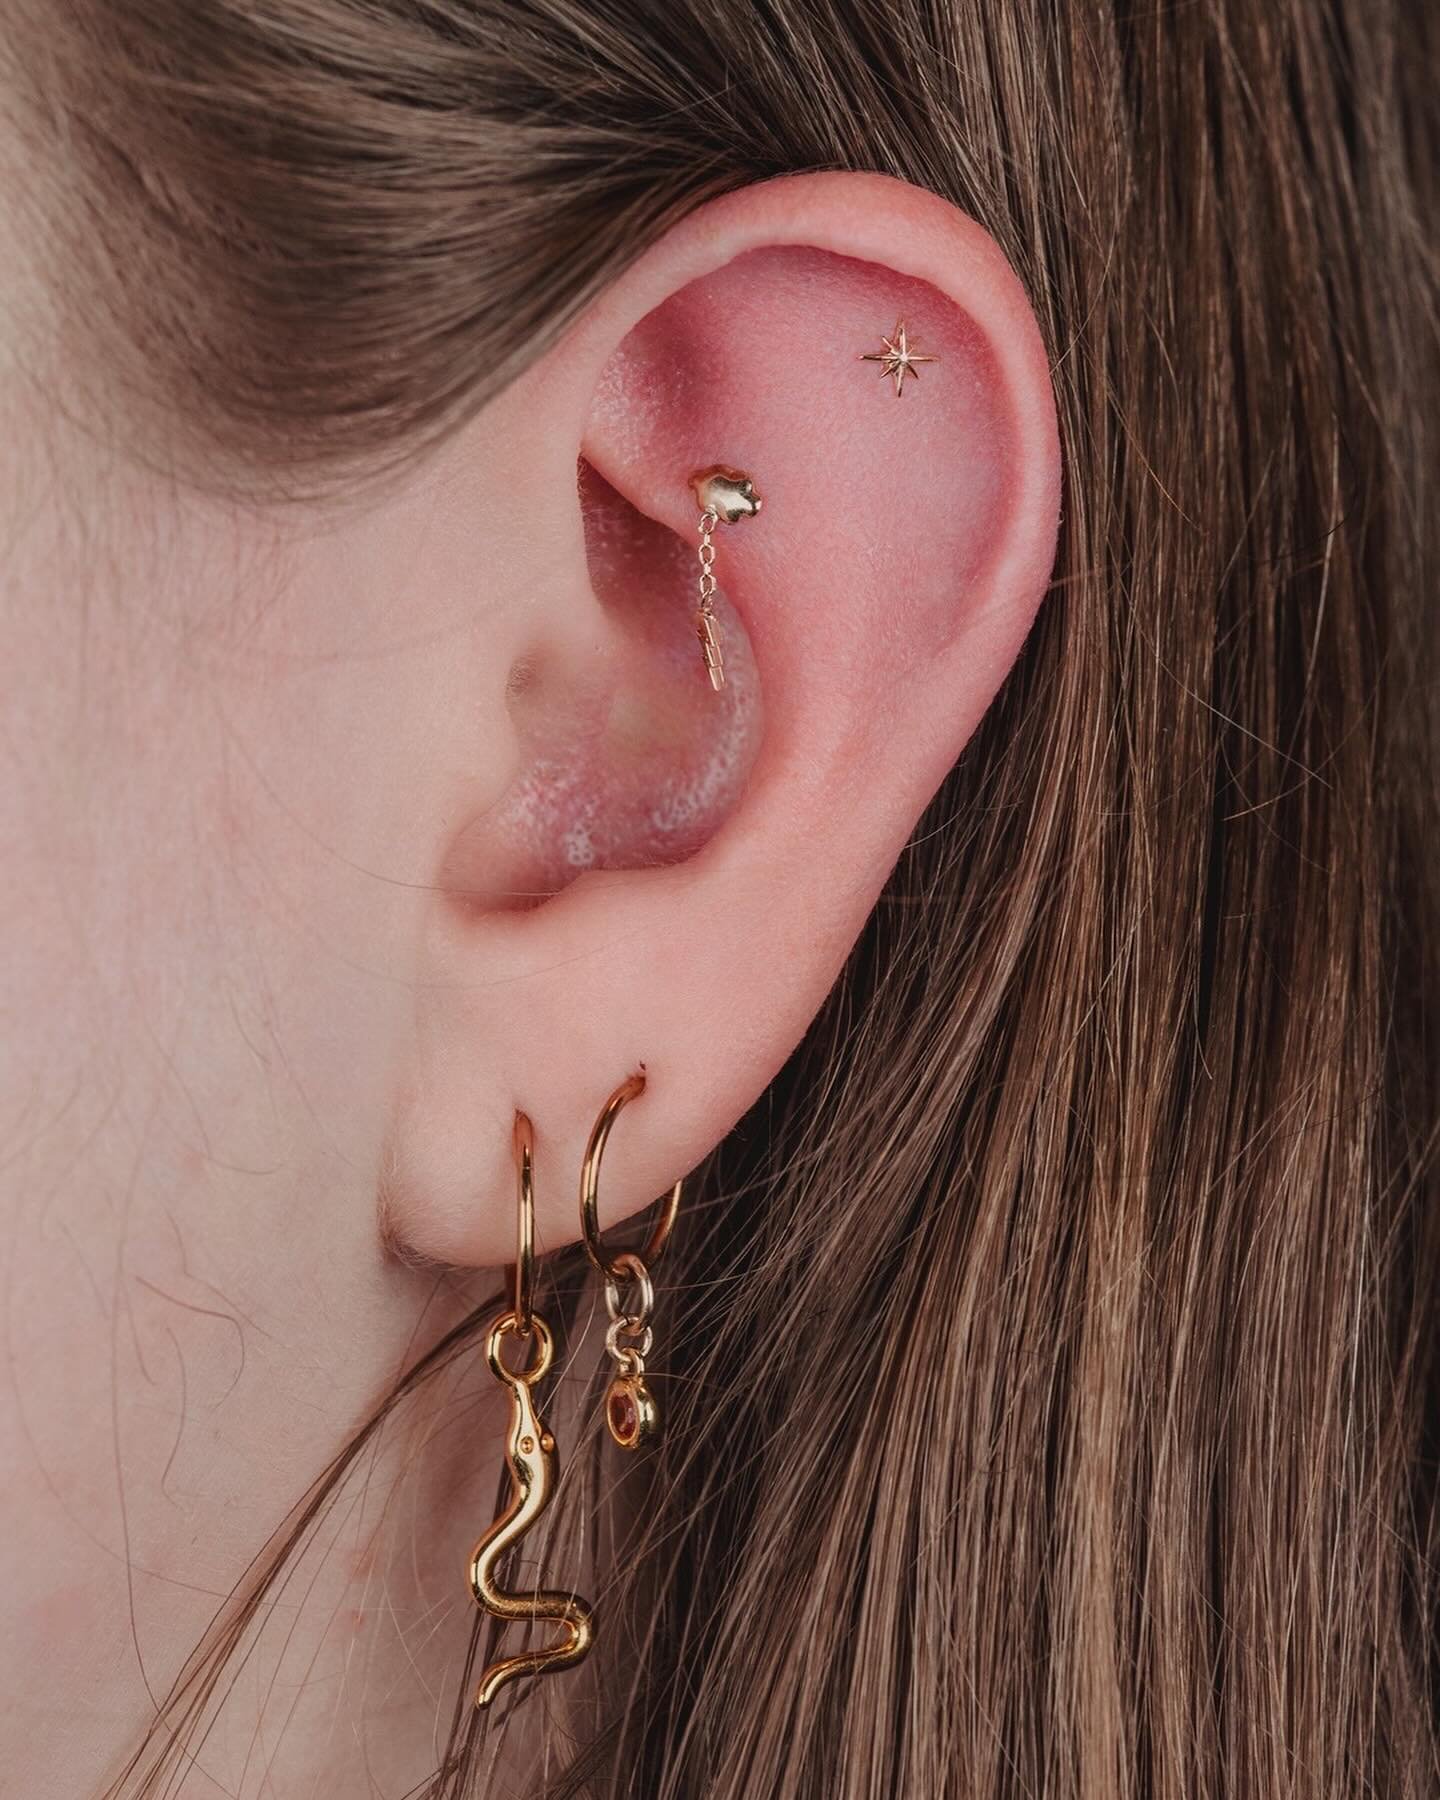 GROW⚡️
 
BEYOND
 
A set of yellow gold additions to make a hella cool pair for this client-an outer conch with the &ldquo;Cumulus 9&rdquo; from Kiwi Diamond and a &ldquo;Sparkle Motion&rdquo; end from Maya in the flat 💫Piercings performed by William